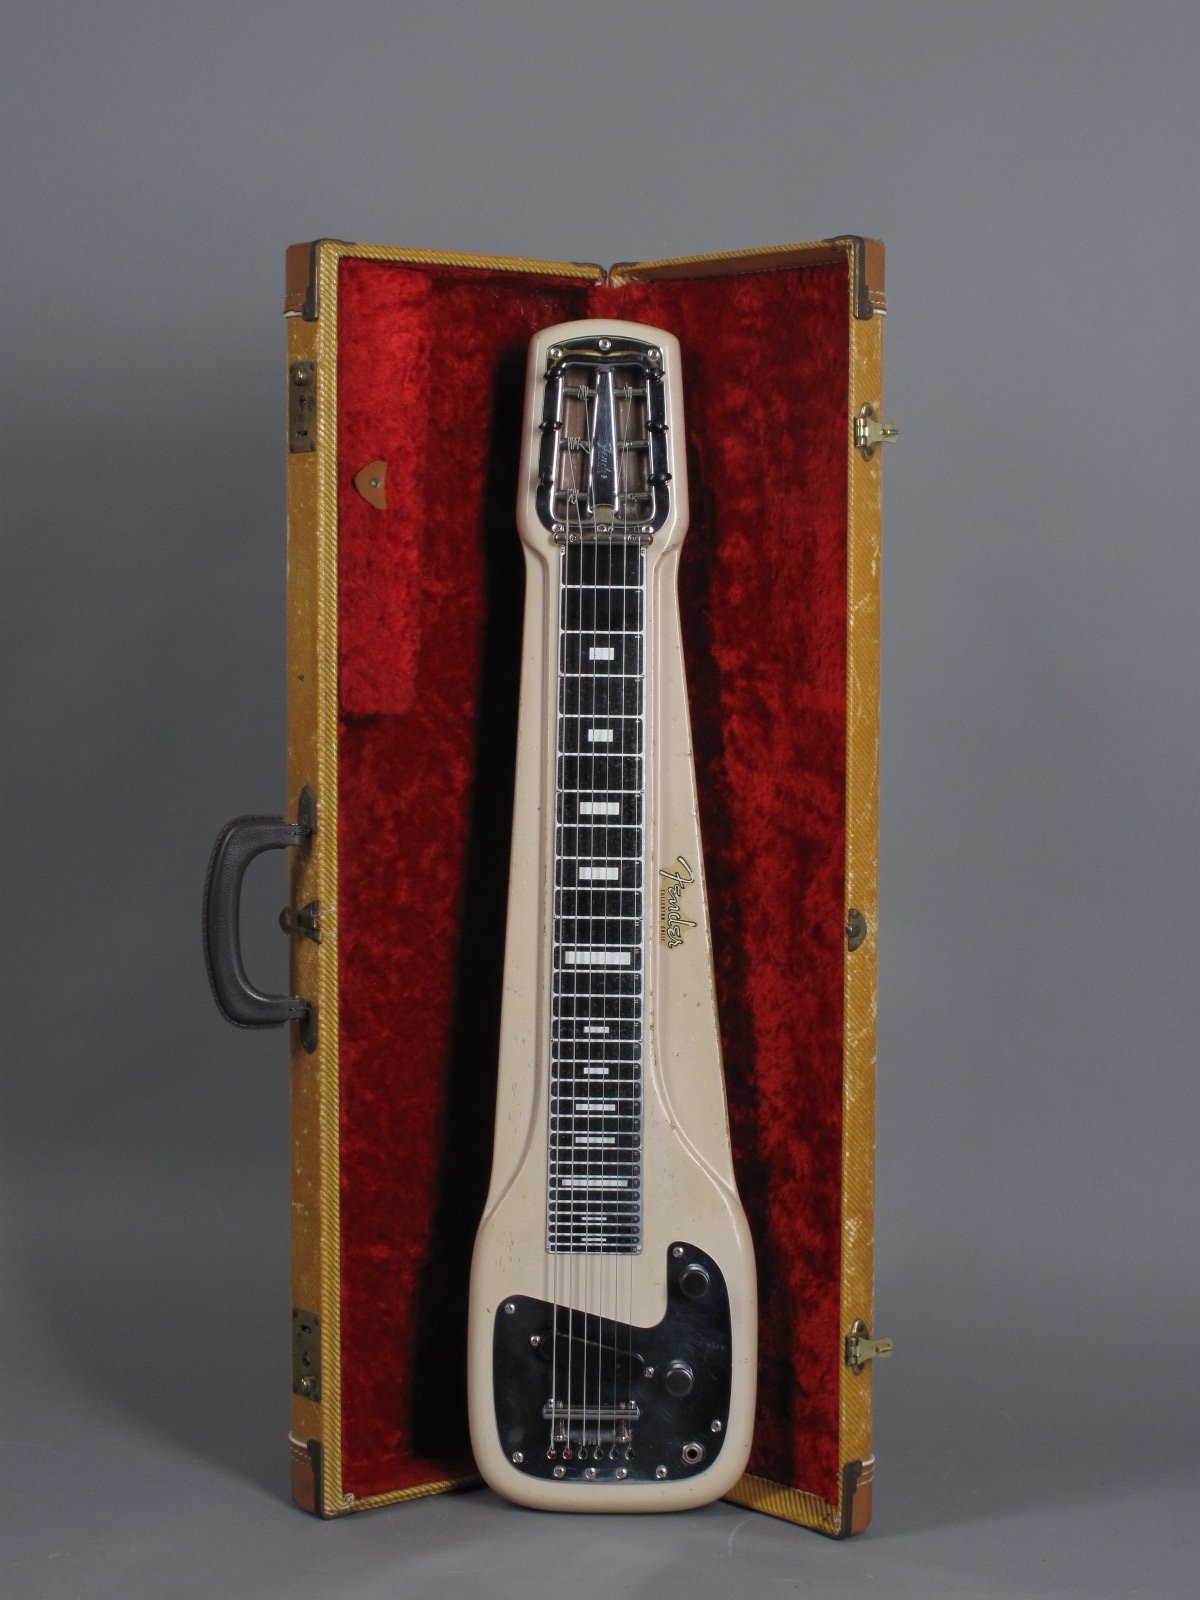 dating your fender champion lap steel